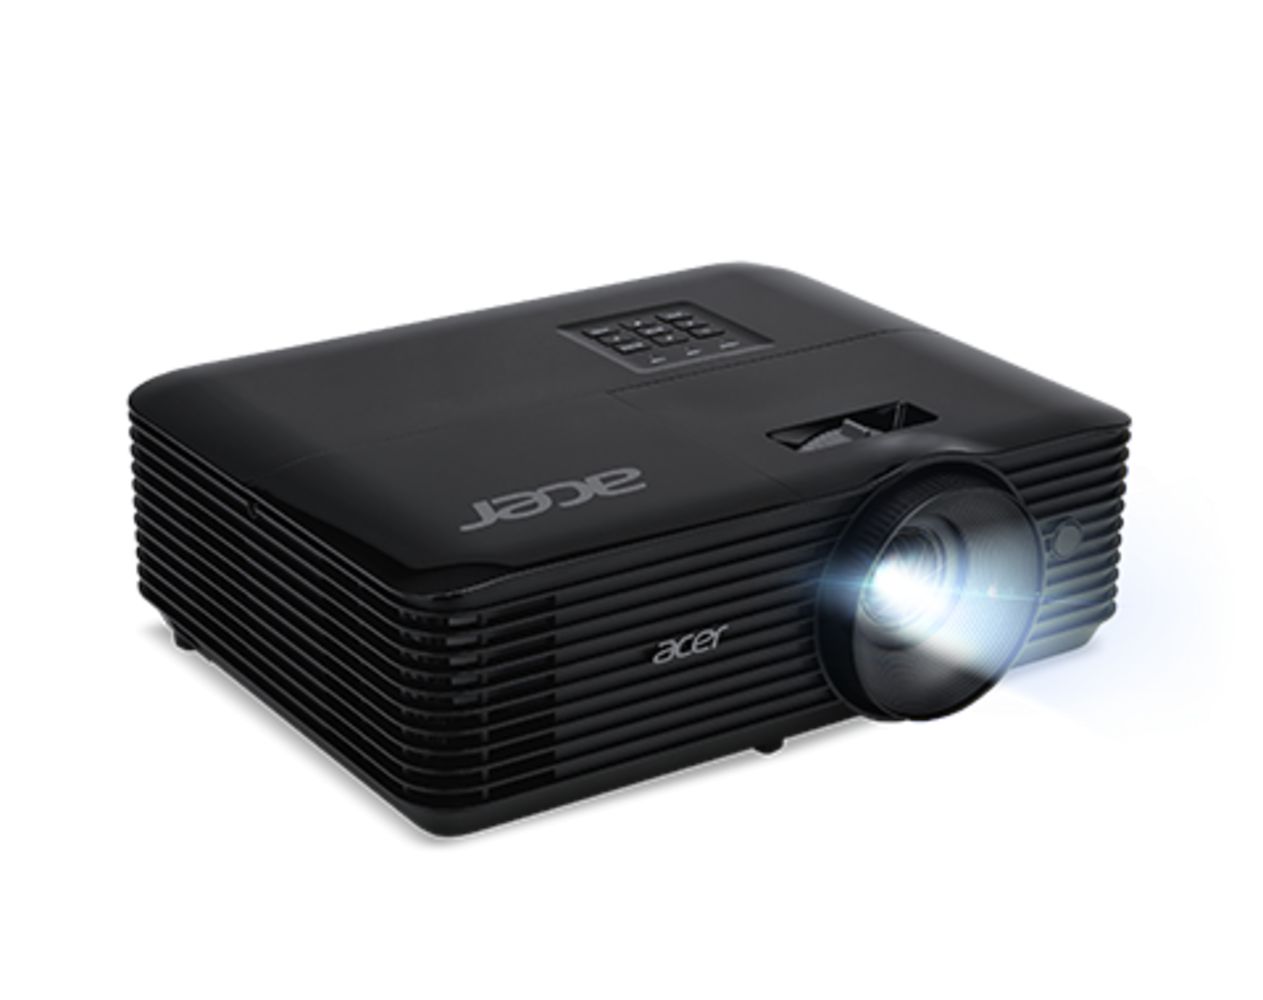 Proiector ACER X1529HP, DLP 3D, FHD 1920* 1080, up to WUXGA 1920* 1200, 4500 lumeni, 16:9/ 4:3, 10.000:1, zoom 1.1X, lampa 4.000 ore/ 20.000 ore EcoPro, 26- 35 dB, boxa 3W, D-sub, 2* HDMI, PC audio, USB A (5V/1.5A, USB Type A), RS232, greutate 2.88 kg, Acer BlueLight Shield, 24/ 7, WirelessMirror_2